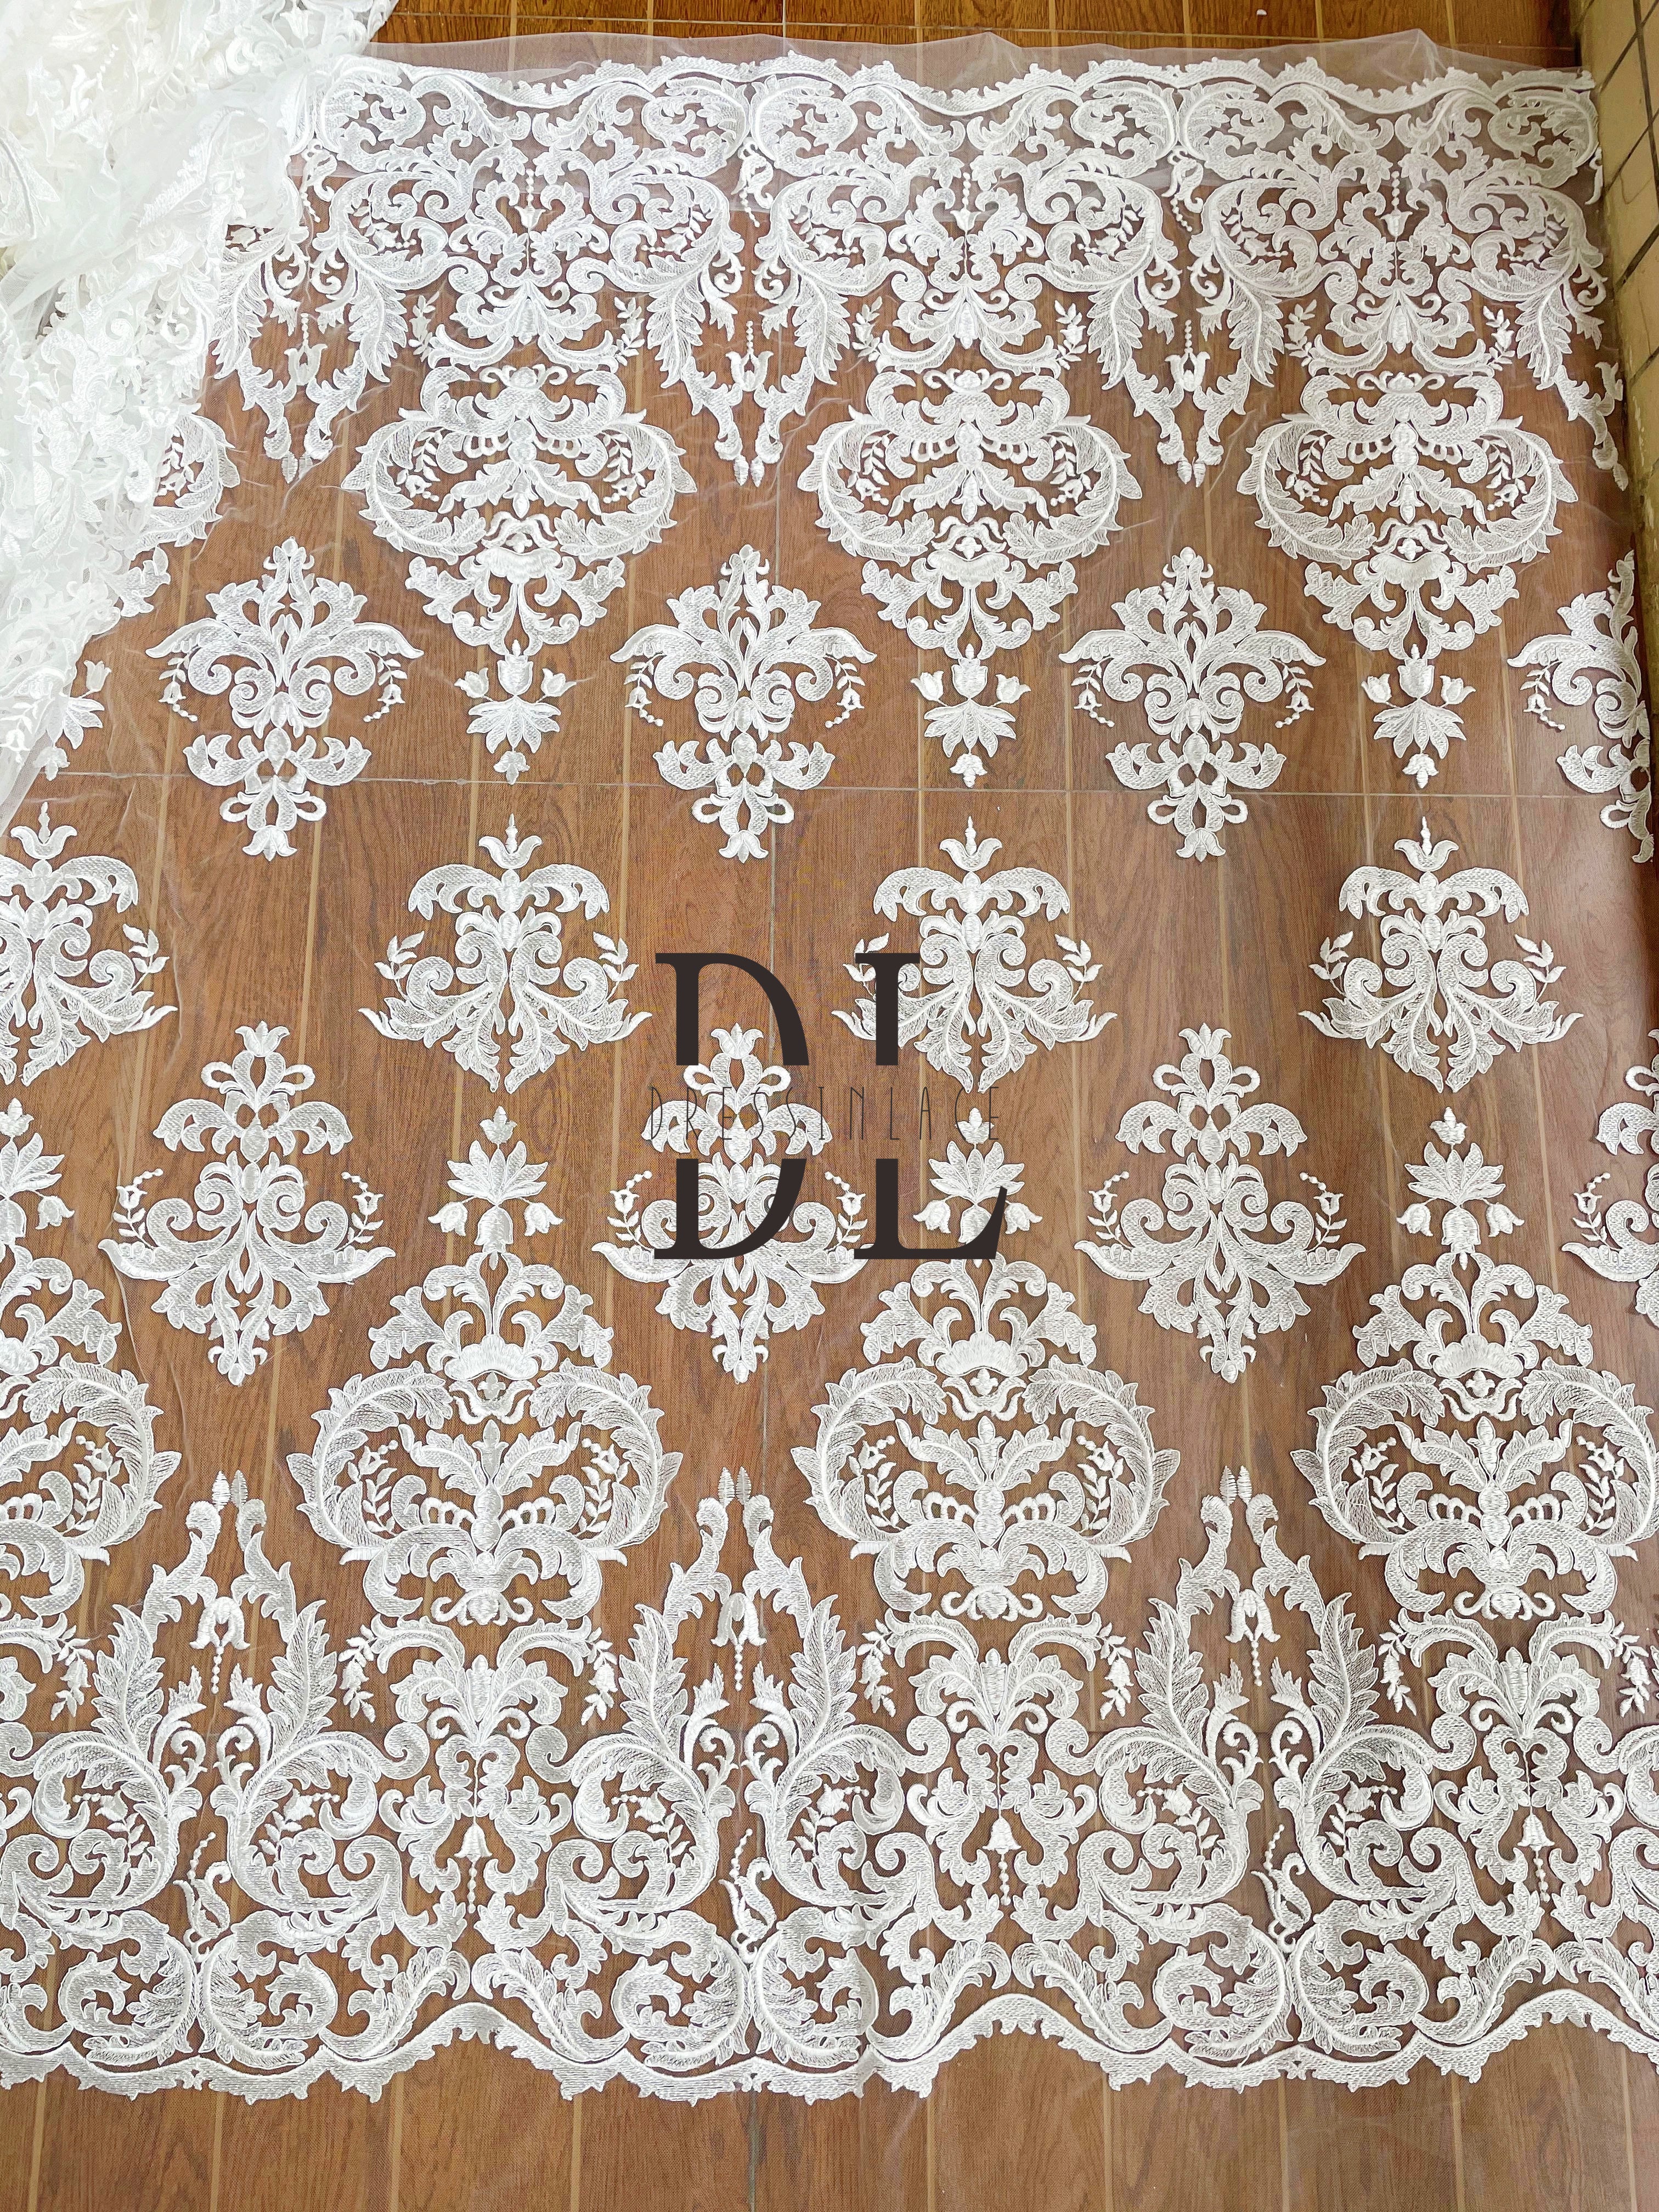 DL130116 Elegant Embroidery Lace Fabric with Sparkling Sequins - Perfect for Wedding Gowns DL130116